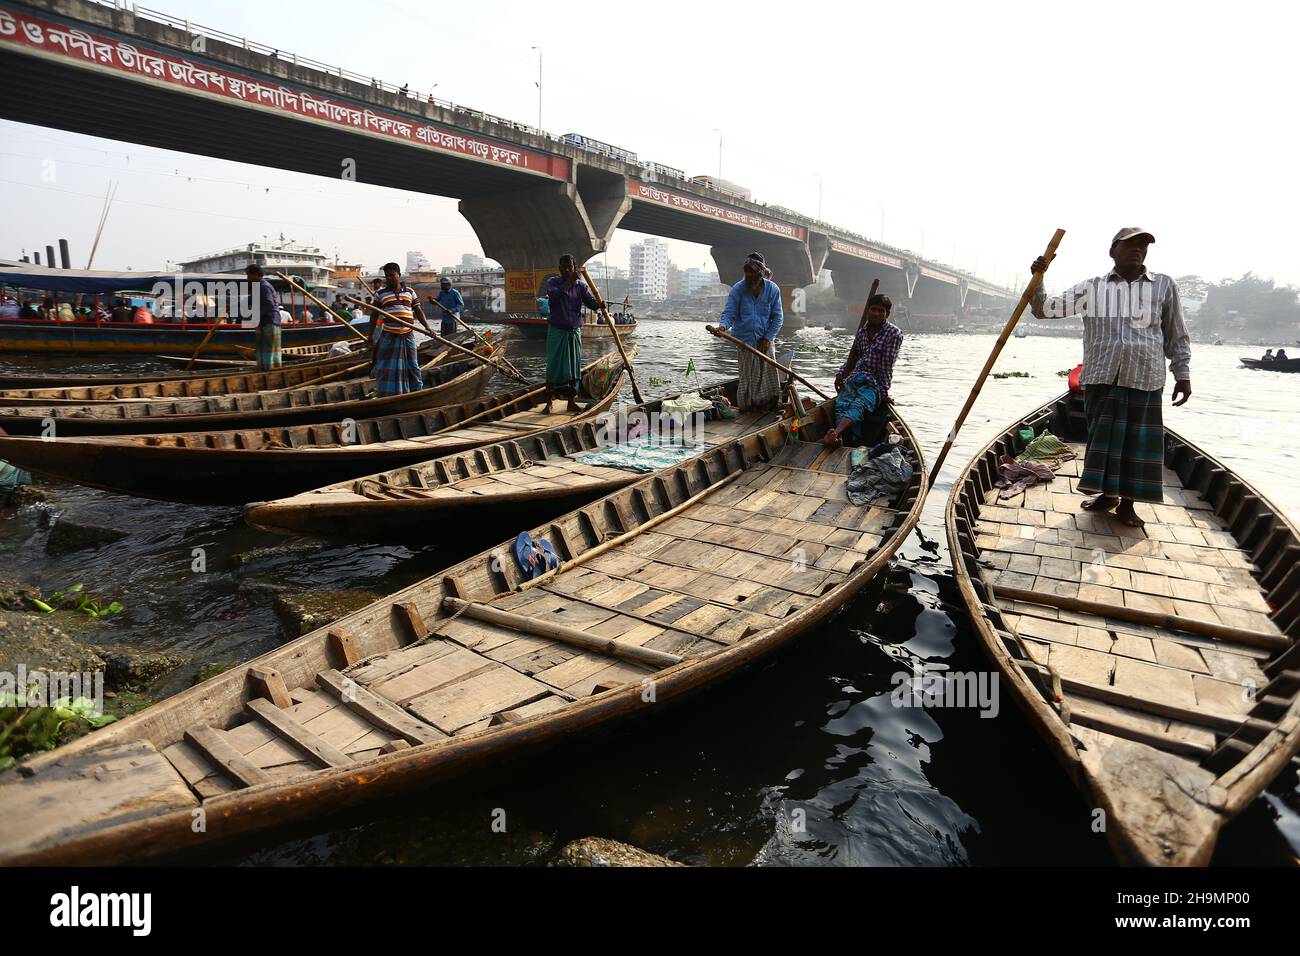 A Boatman under the bridge Waiting for customers in wharf. Stock Photo